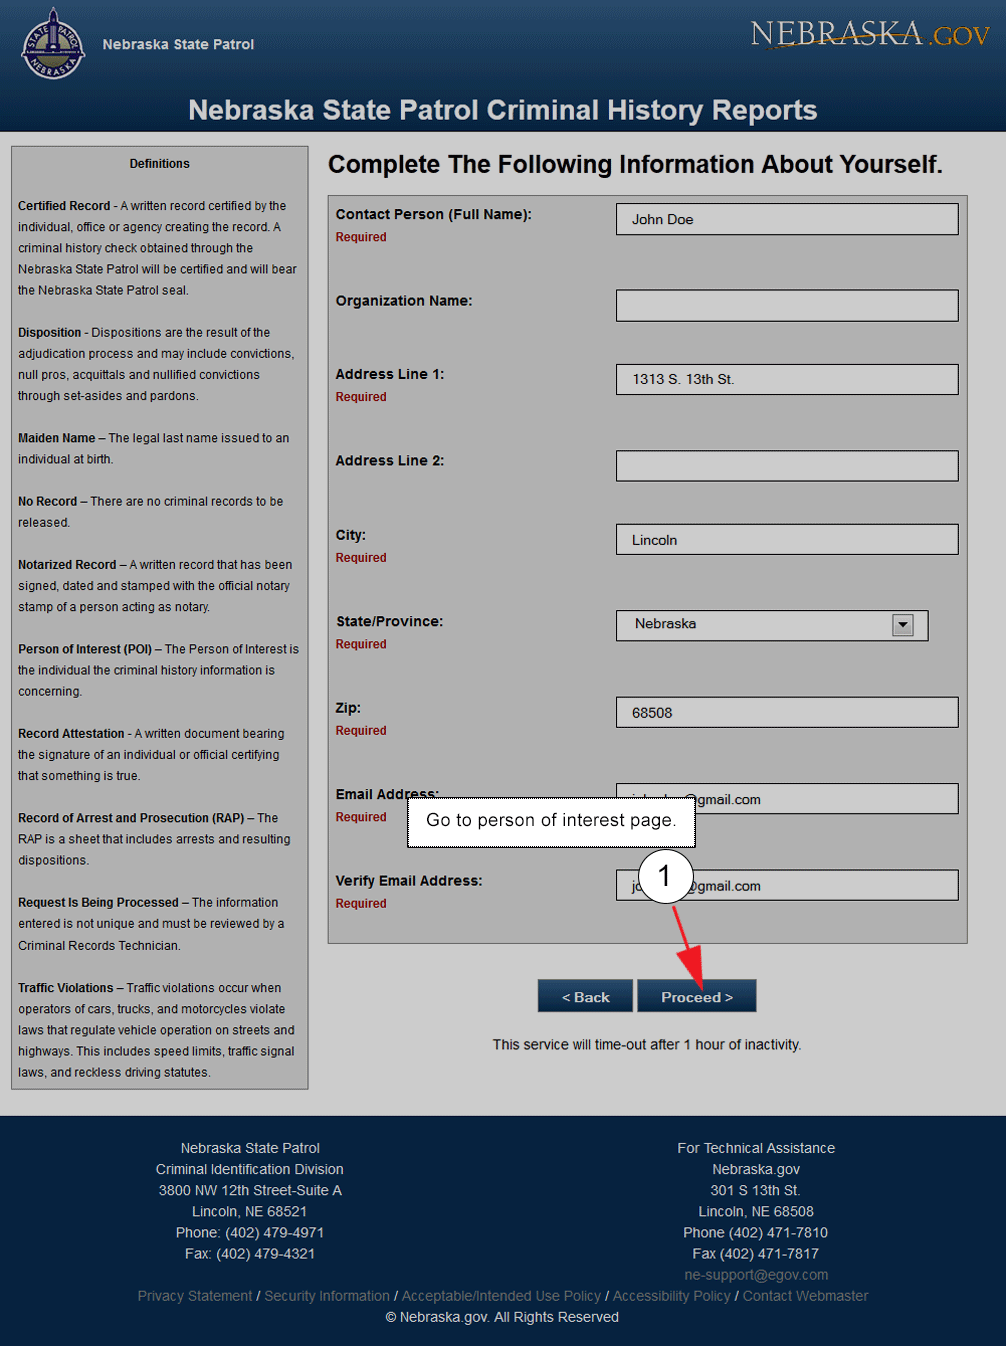 Screenshot of the requestor information page of the Criminal History Request Service